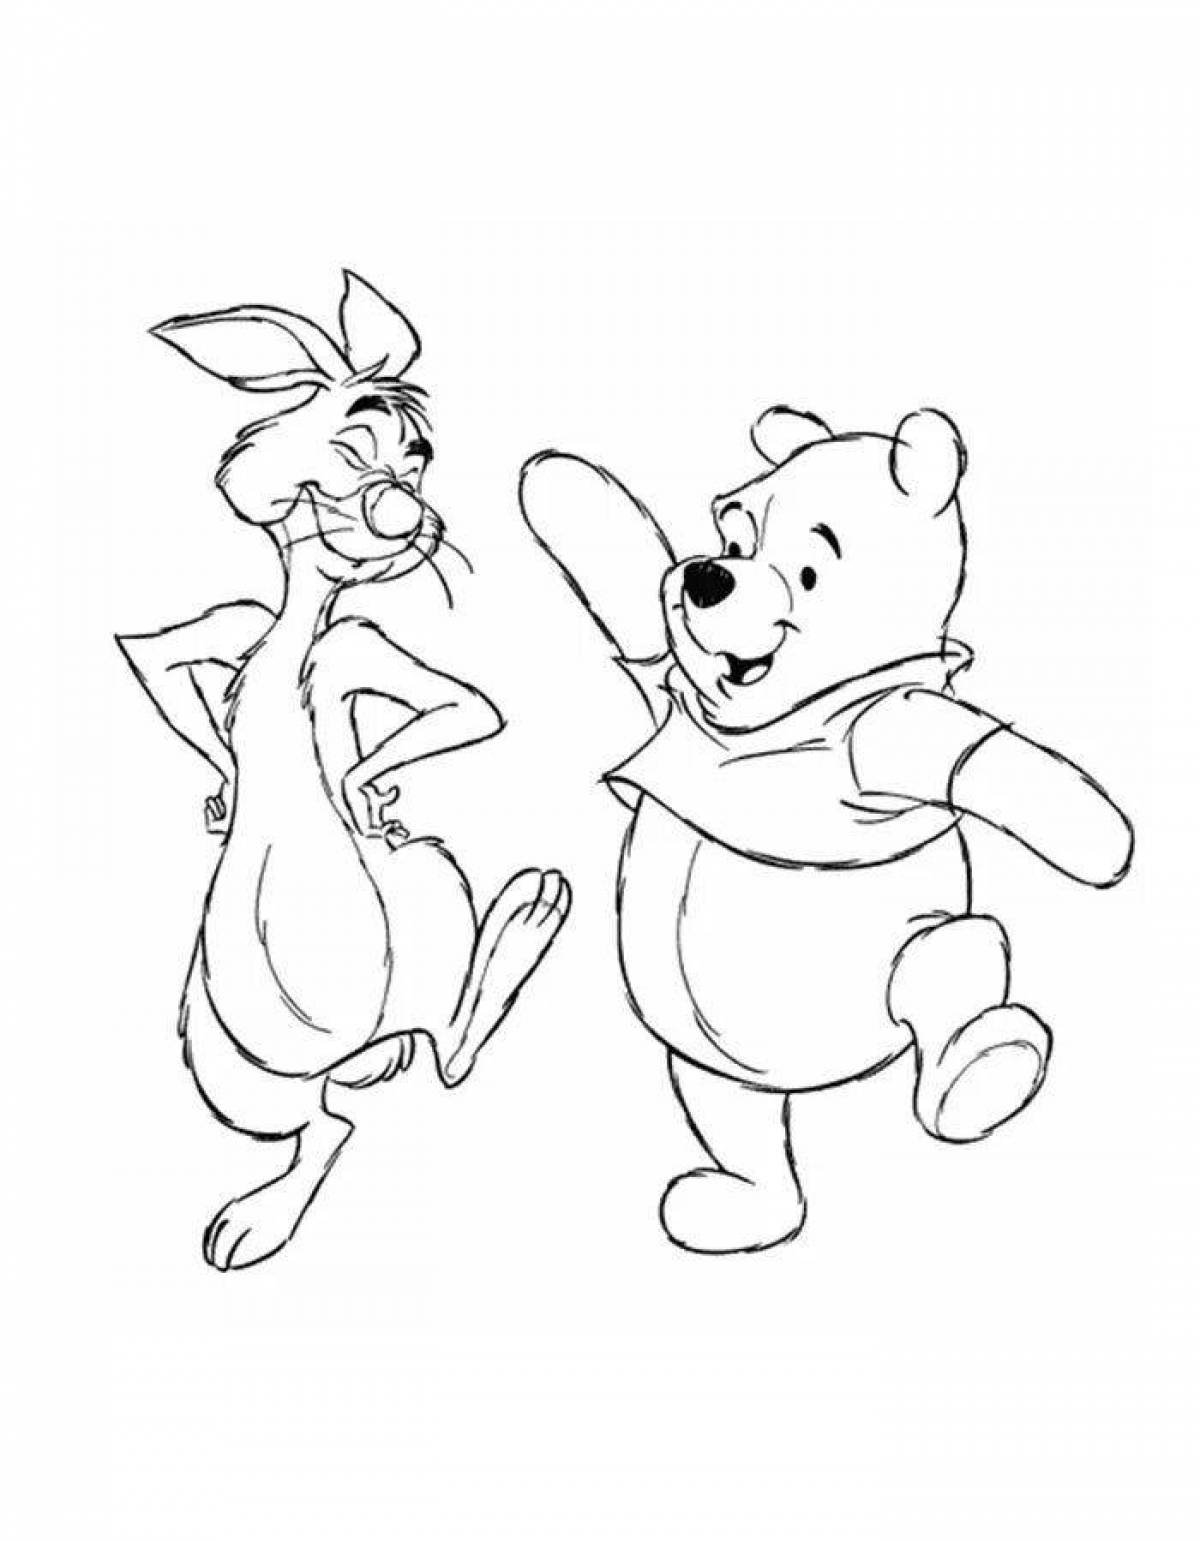 Coloring page of colorful cartoon characters